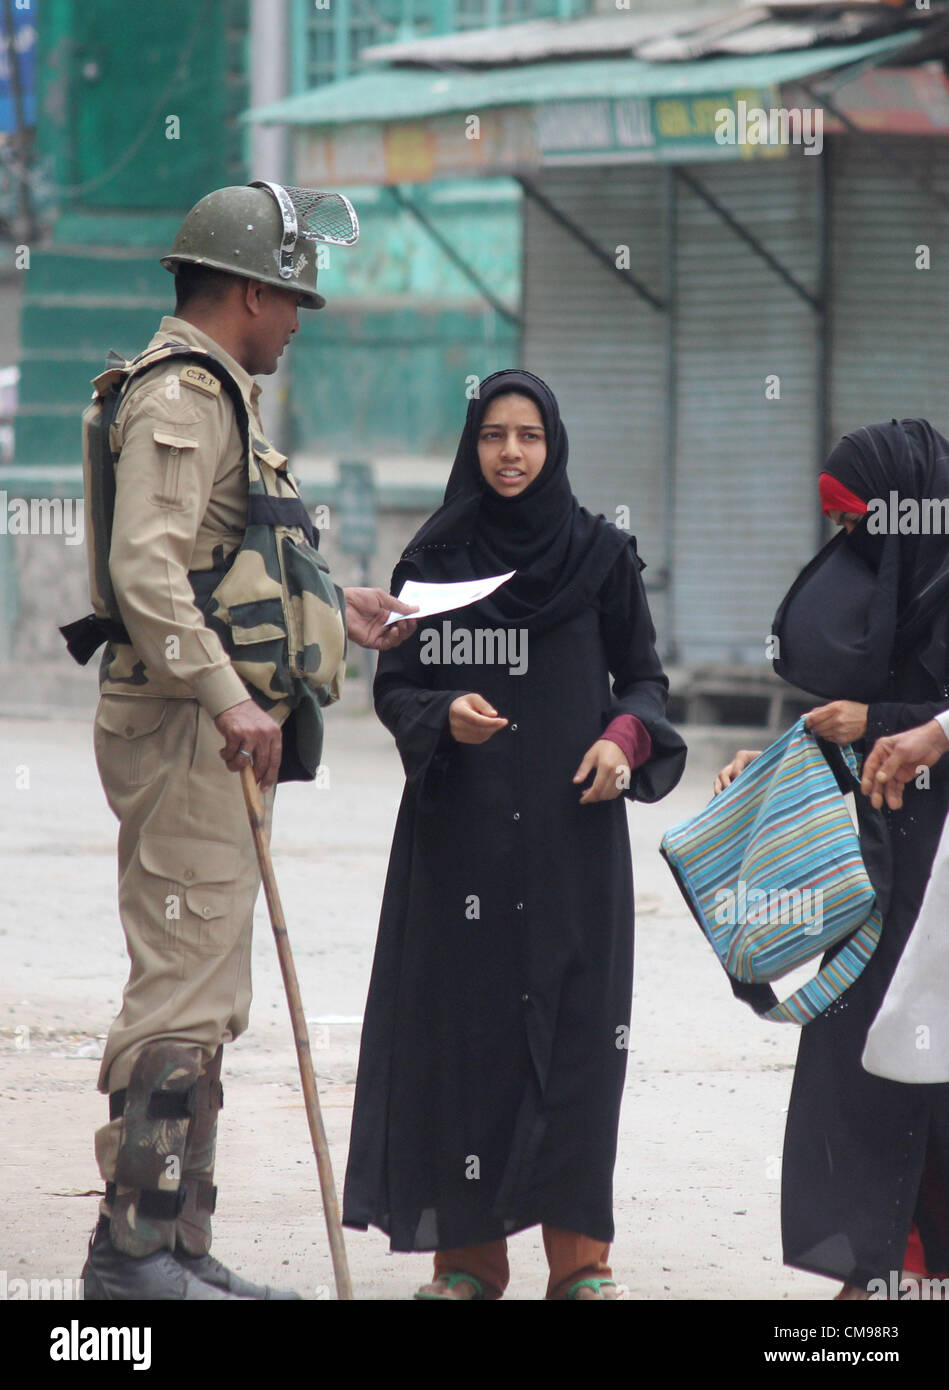 indian Central Reserve Police Force (CRPF) member questioning a Kashmiri Muslim woman during a curfew in Srinagar, the summer capiatl of indian kashmir  on  27,6. 2012. A major fire gutted a 350-year-old, revered Sufi Muslim shrine in Indian Kashmir June 25,Thousands of Indian forces patrolled tense streets in Kashmir's main city on Wednesday as residents boycotted work for a third straight day to protest the fiery destruction of a 350-year-old Muslim shrine.Shops, businesses and schools remained closed in Srinagar, while public buses and taxis were nowhere to be found. Police asked residents  Stock Photo